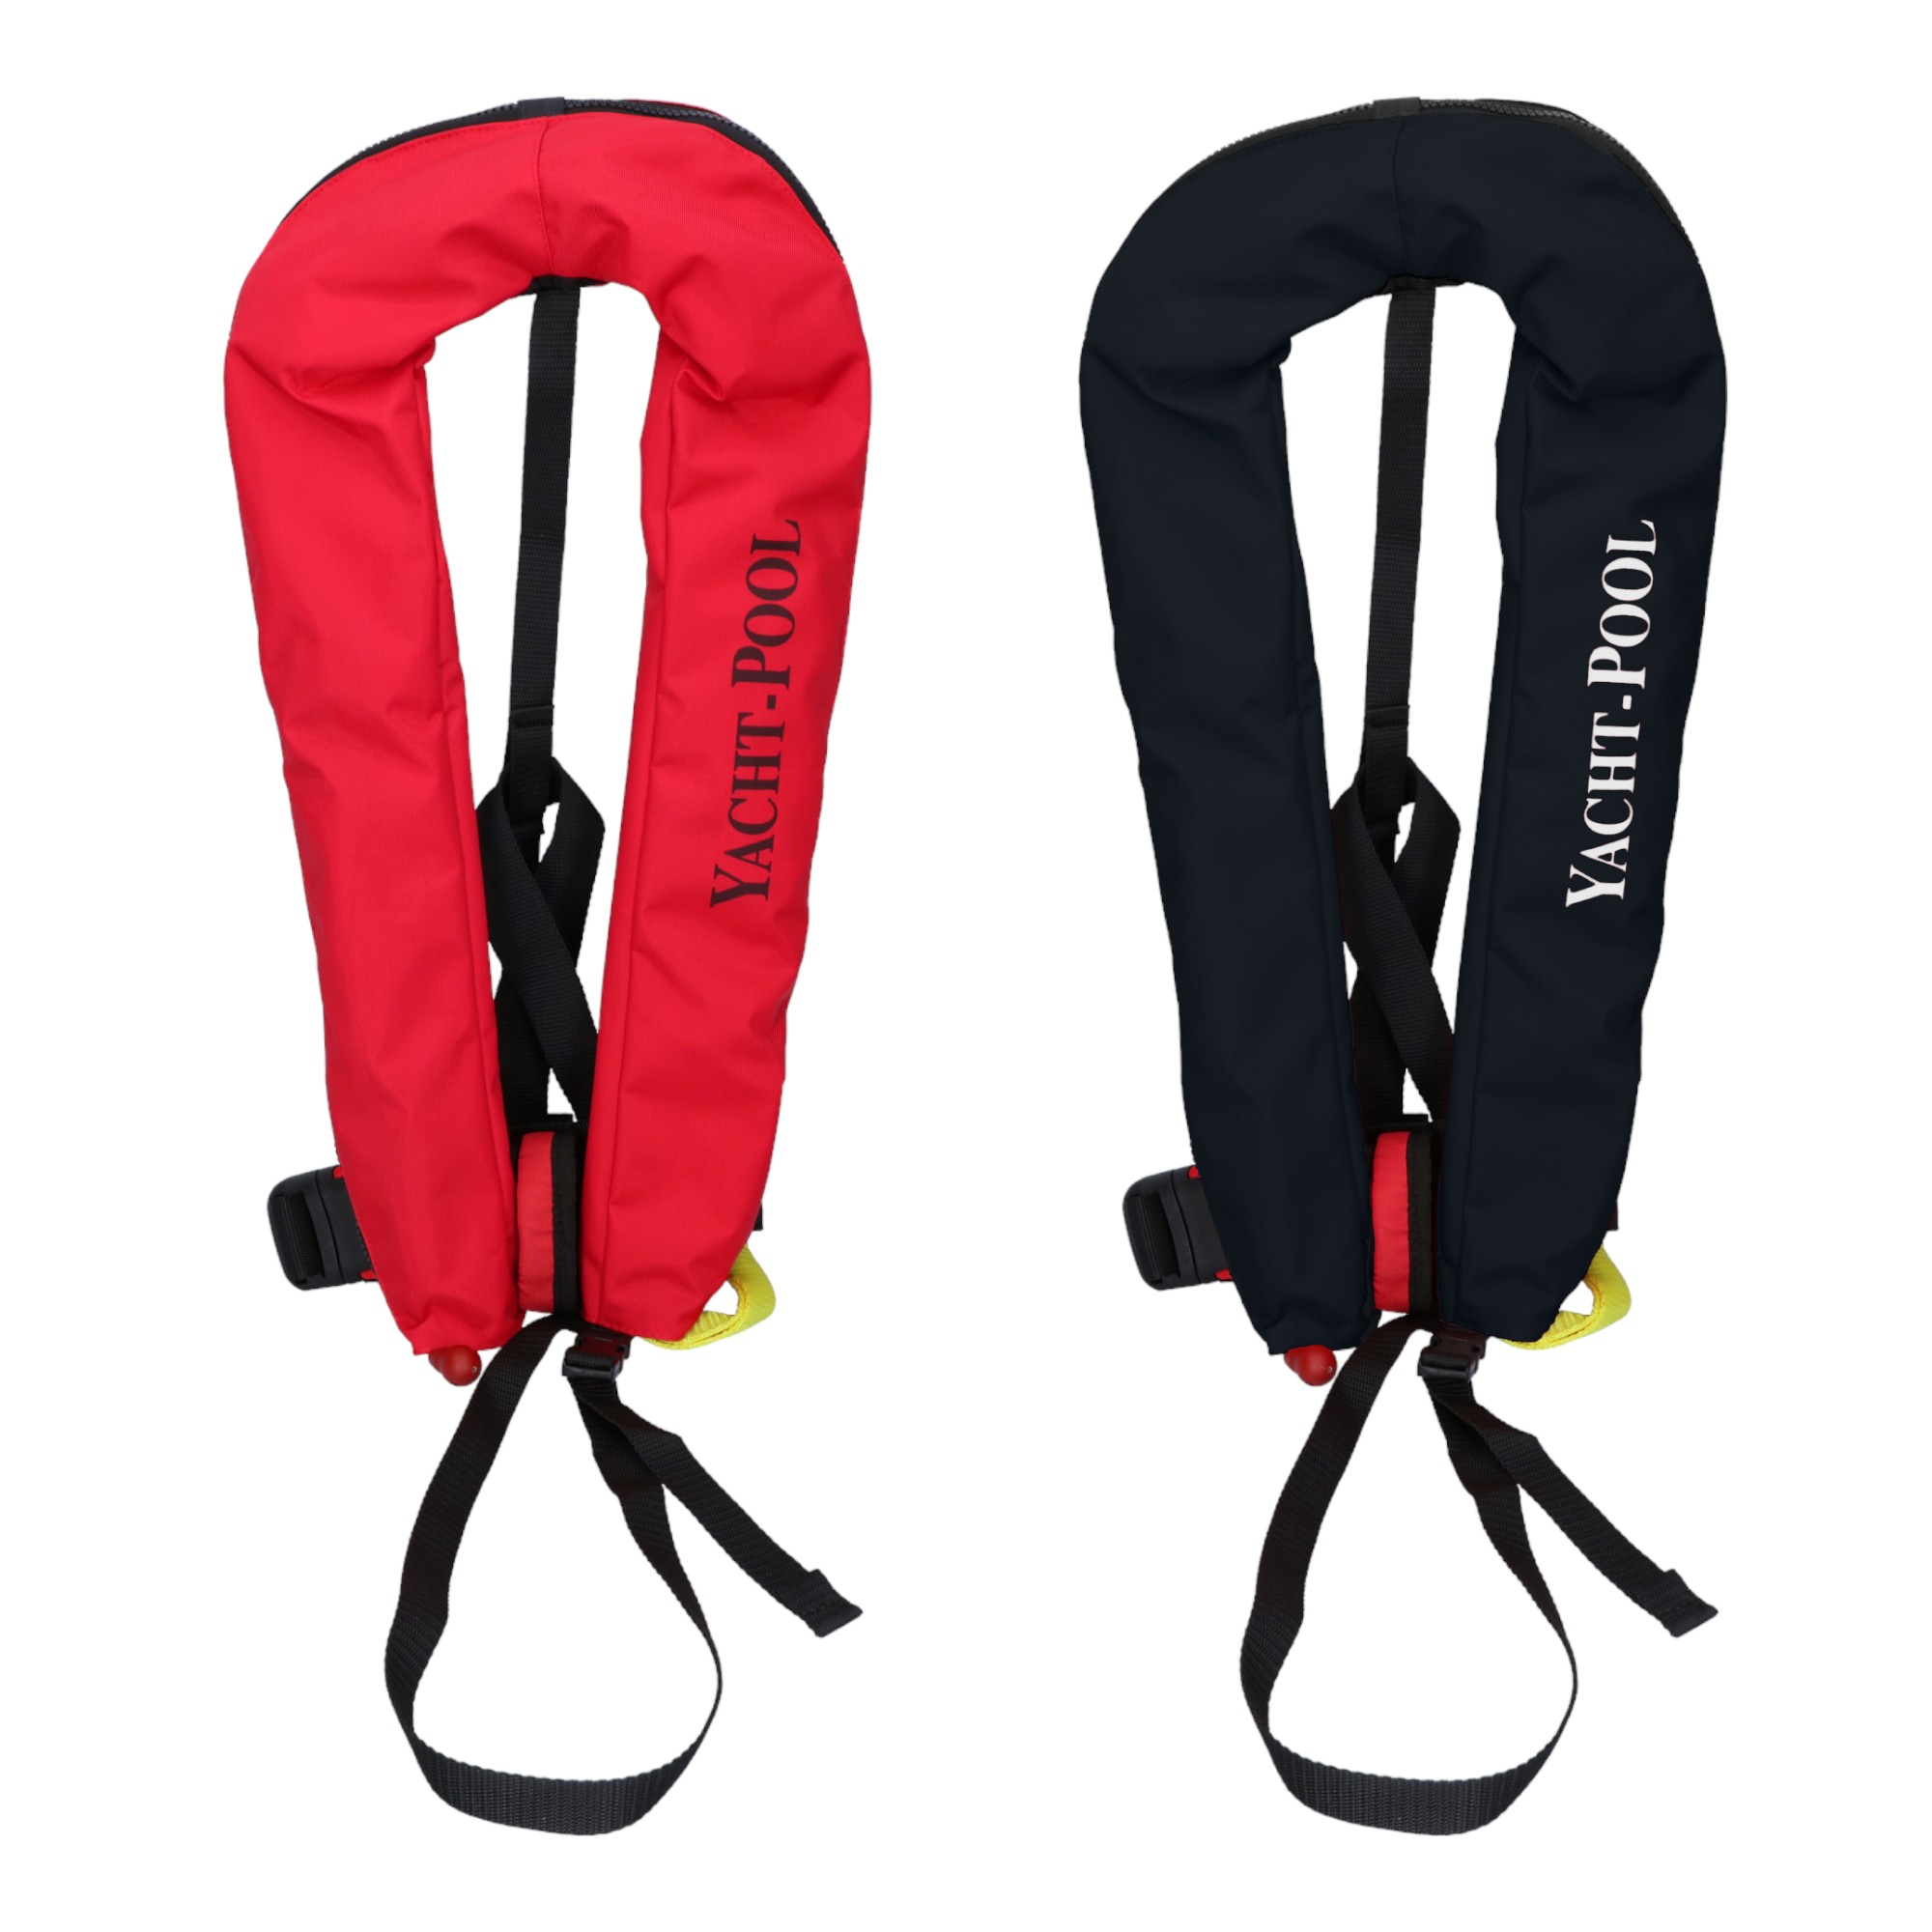 YACHT-POOL fully automatic life jacket 150 N  with waist belt